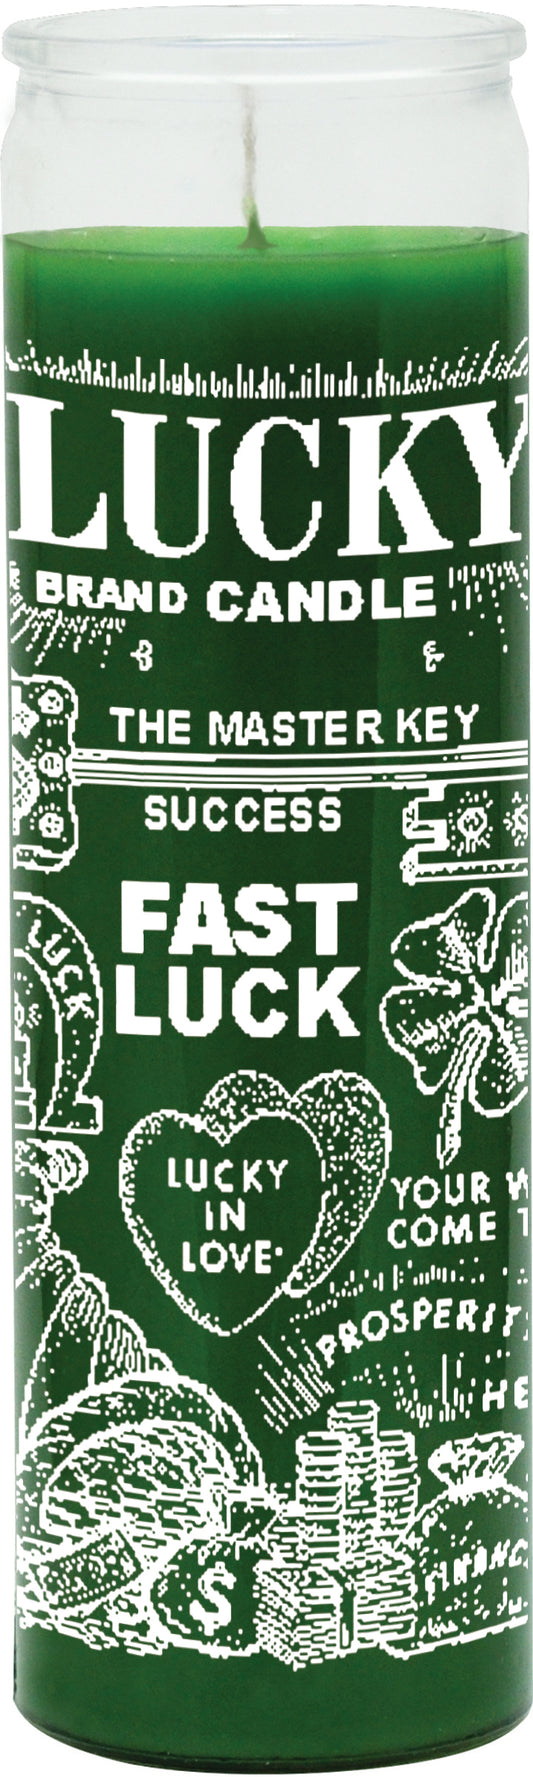 FAST LUCK GREEN-7 DAY SCREEN PRINTED CANDLE